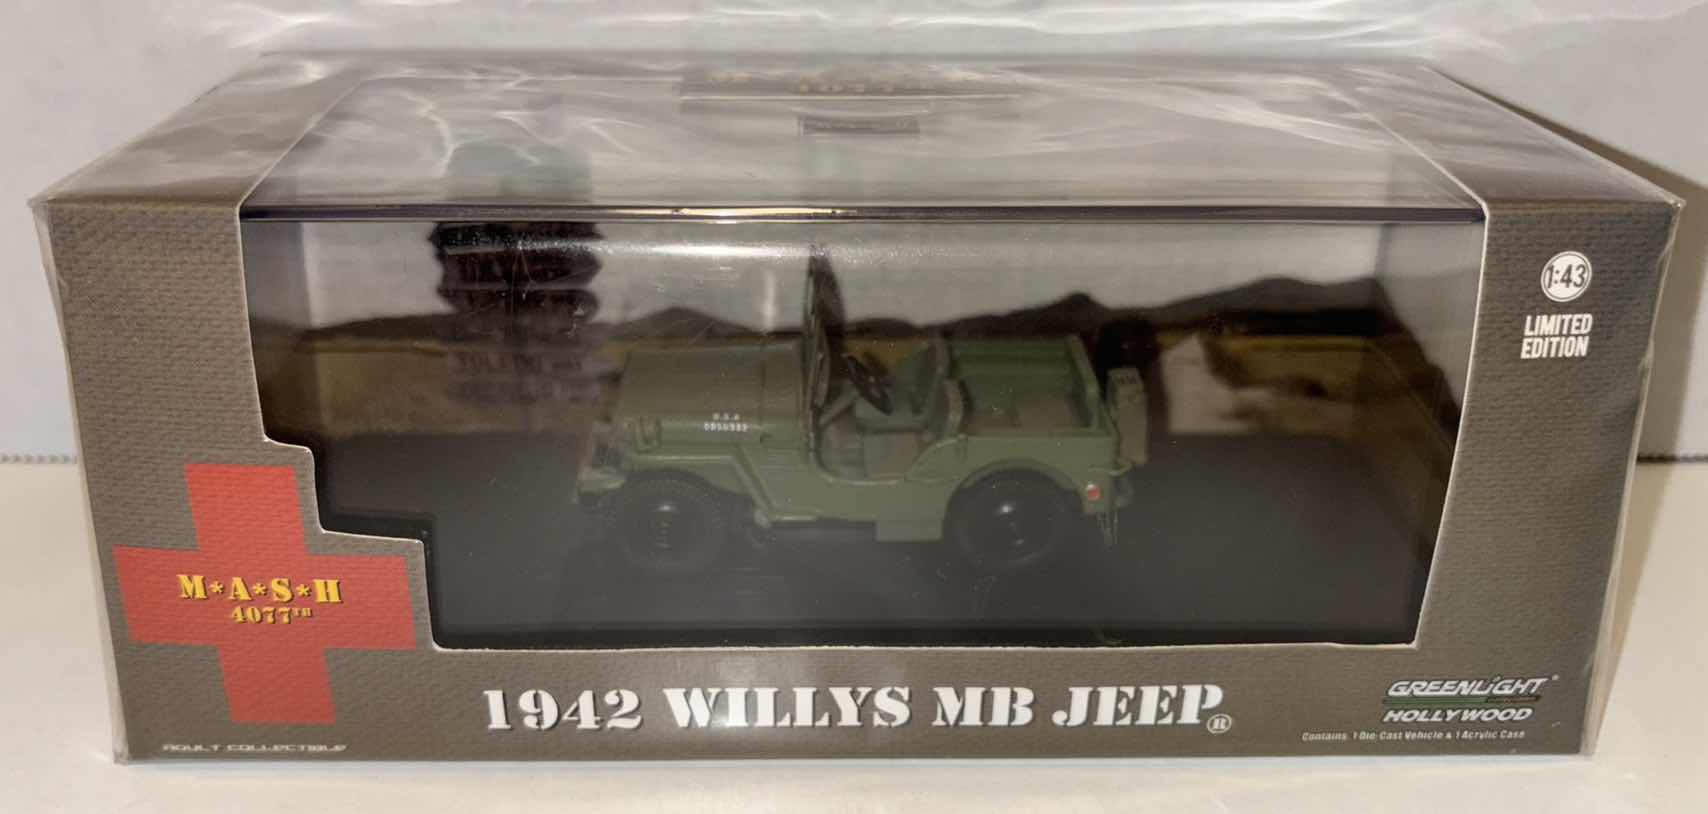 Photo 4 of NEW GREENLIGHT COLLECTIBLES HOLLYWOOD LIMITED EDITION 1:43 SCALE DIE-CAST VEHICLE, M*A*S*H 4077TH 1952 WILLYS M38 A1 JEEP 